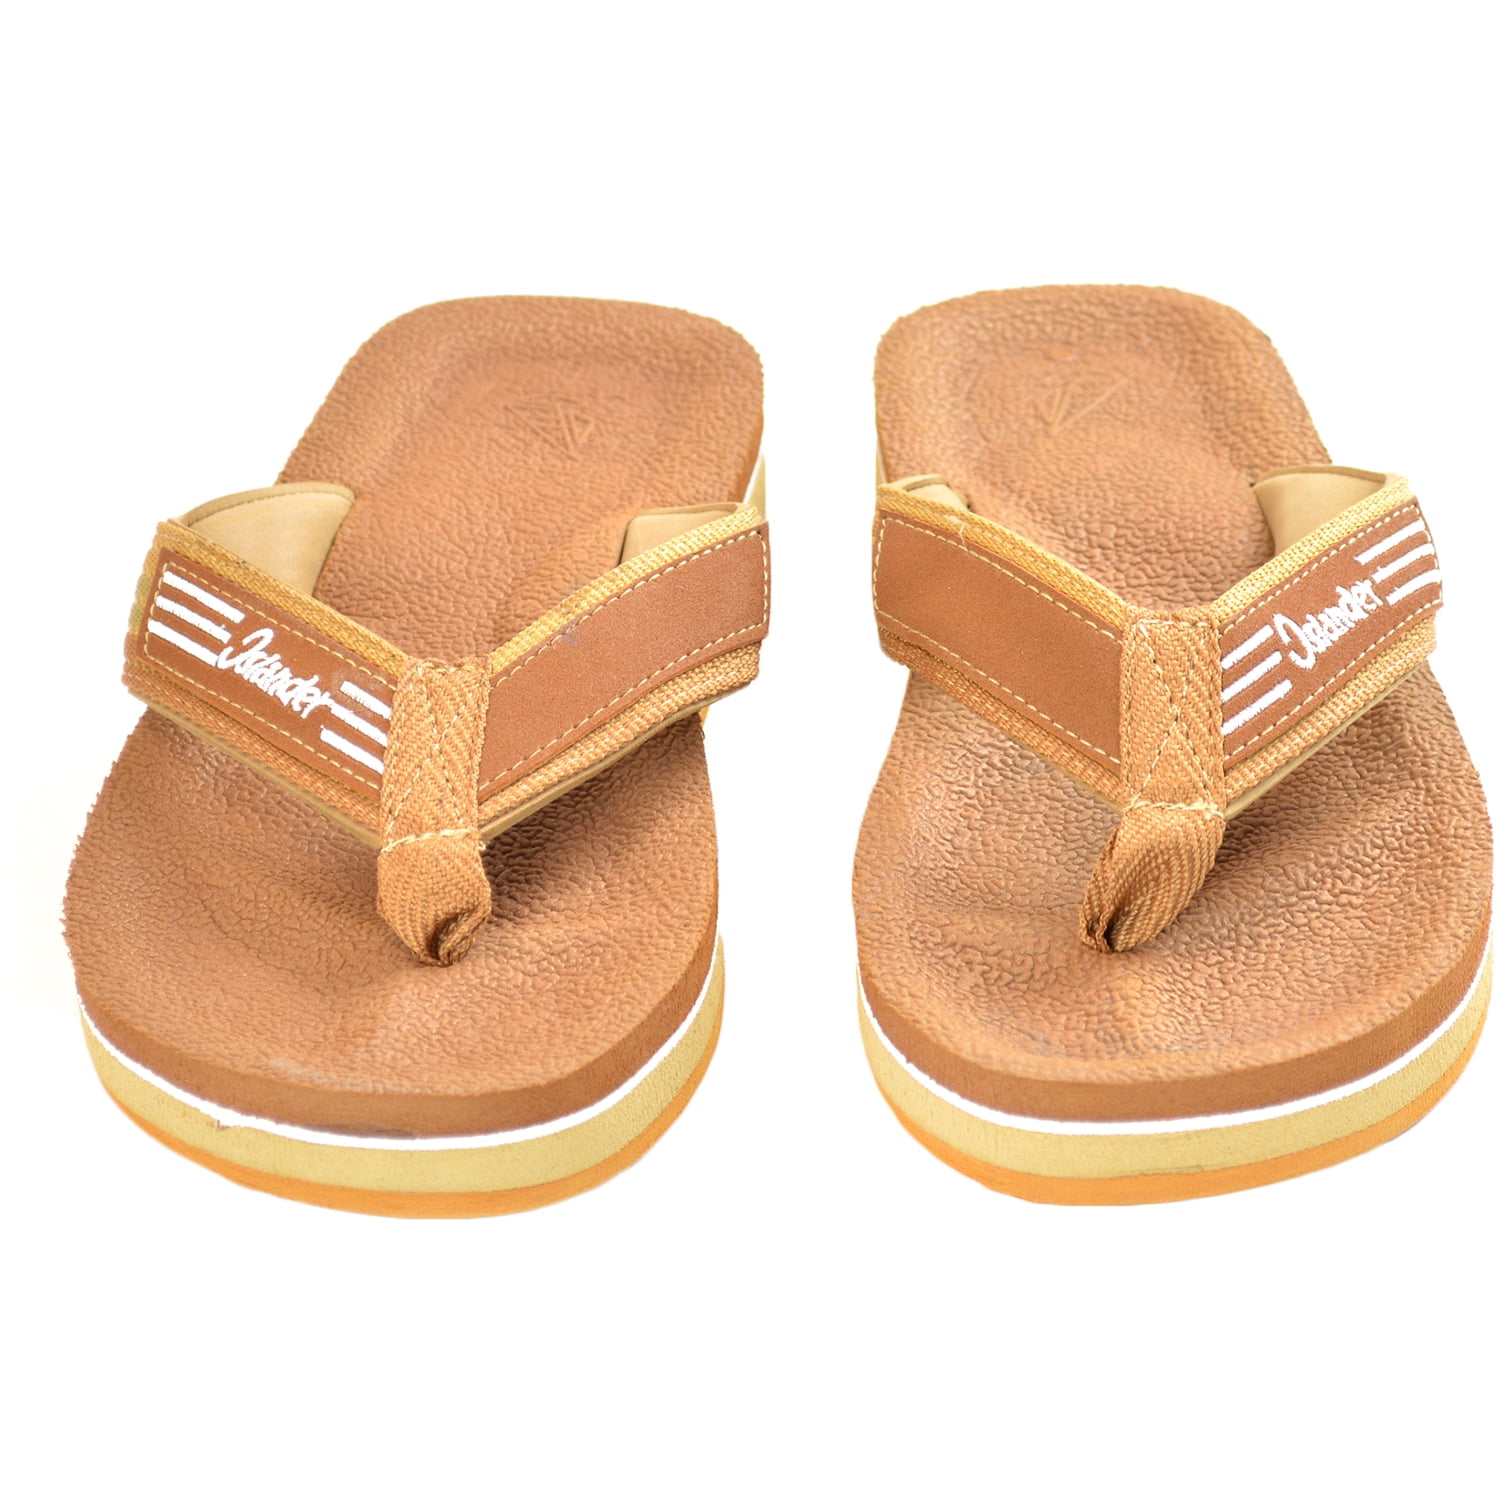 Islander Unisex All-Weather Comfortable and Stylish Flip-Flop Sandals 